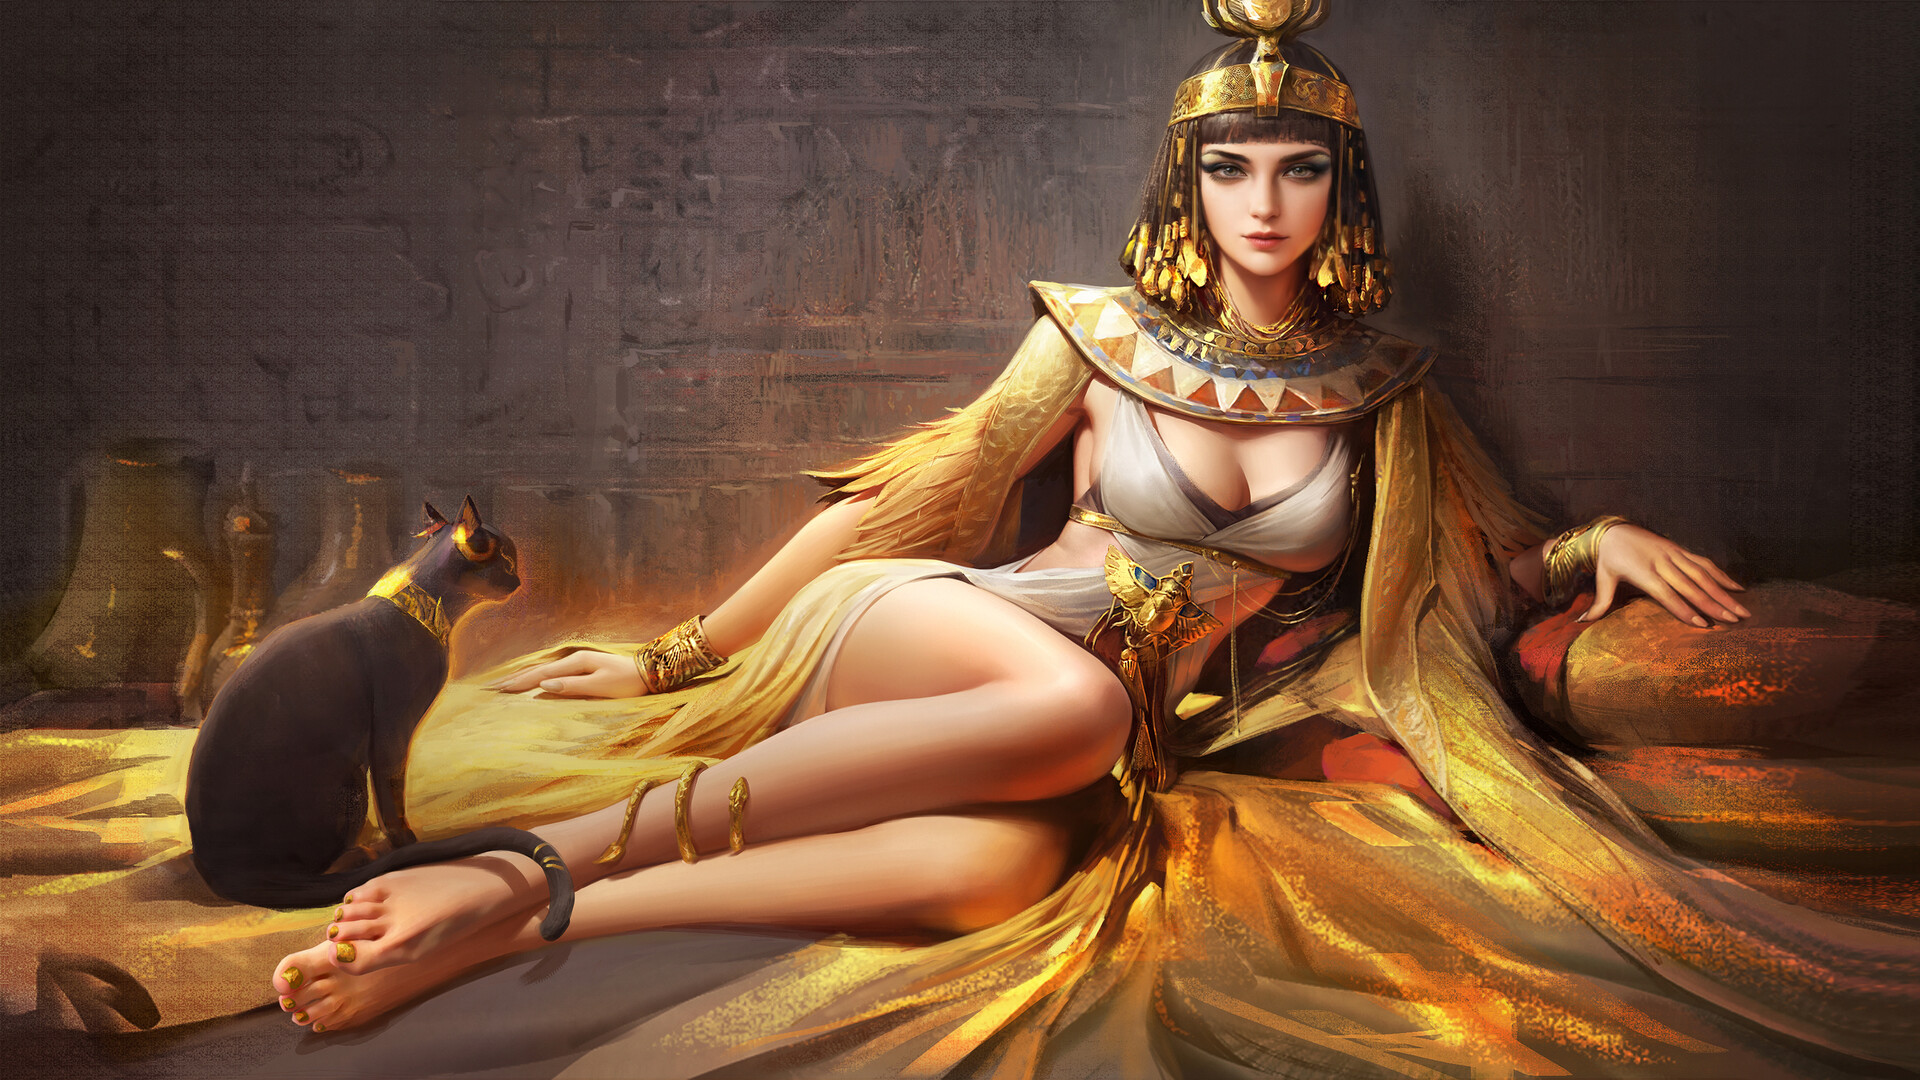 MuSi Drawing Women Egyptian Glamour Gold Cats Feathers Legs Cleopatra  Wallpaper - Resolution:1920x1080 - ID:1323893 